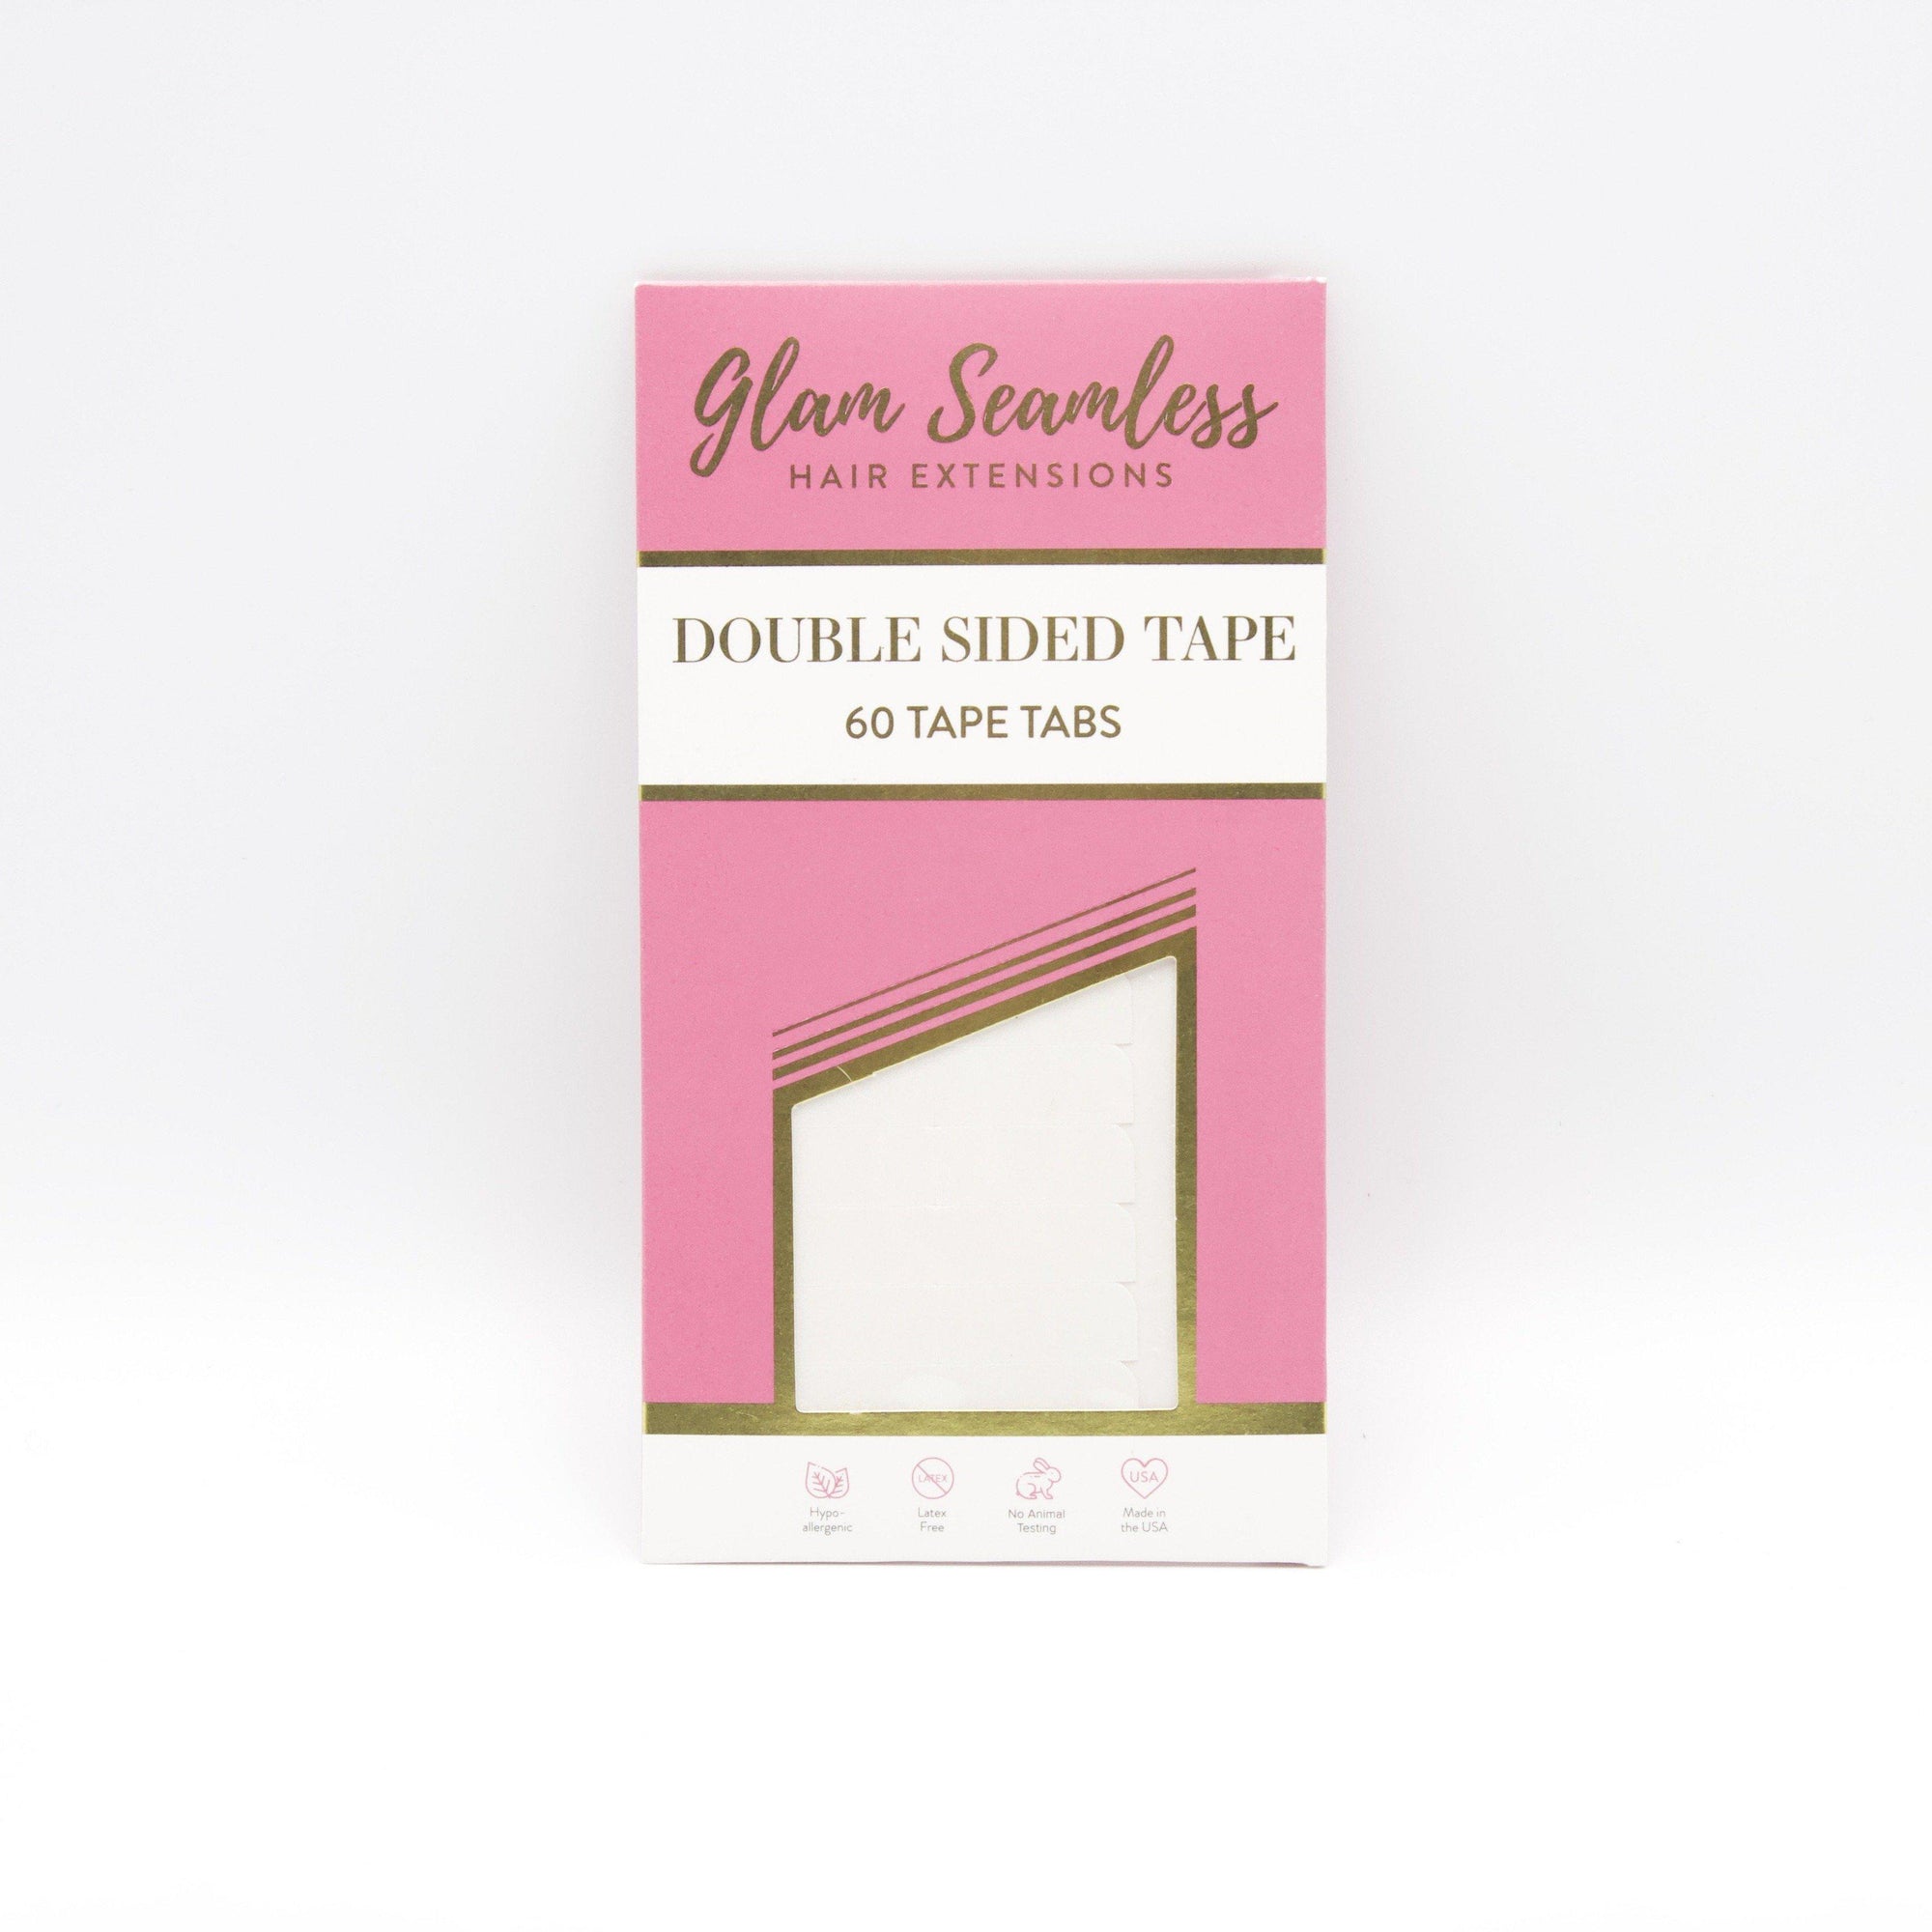 Glam Seamless Double Sided Tape Tabs 60stk